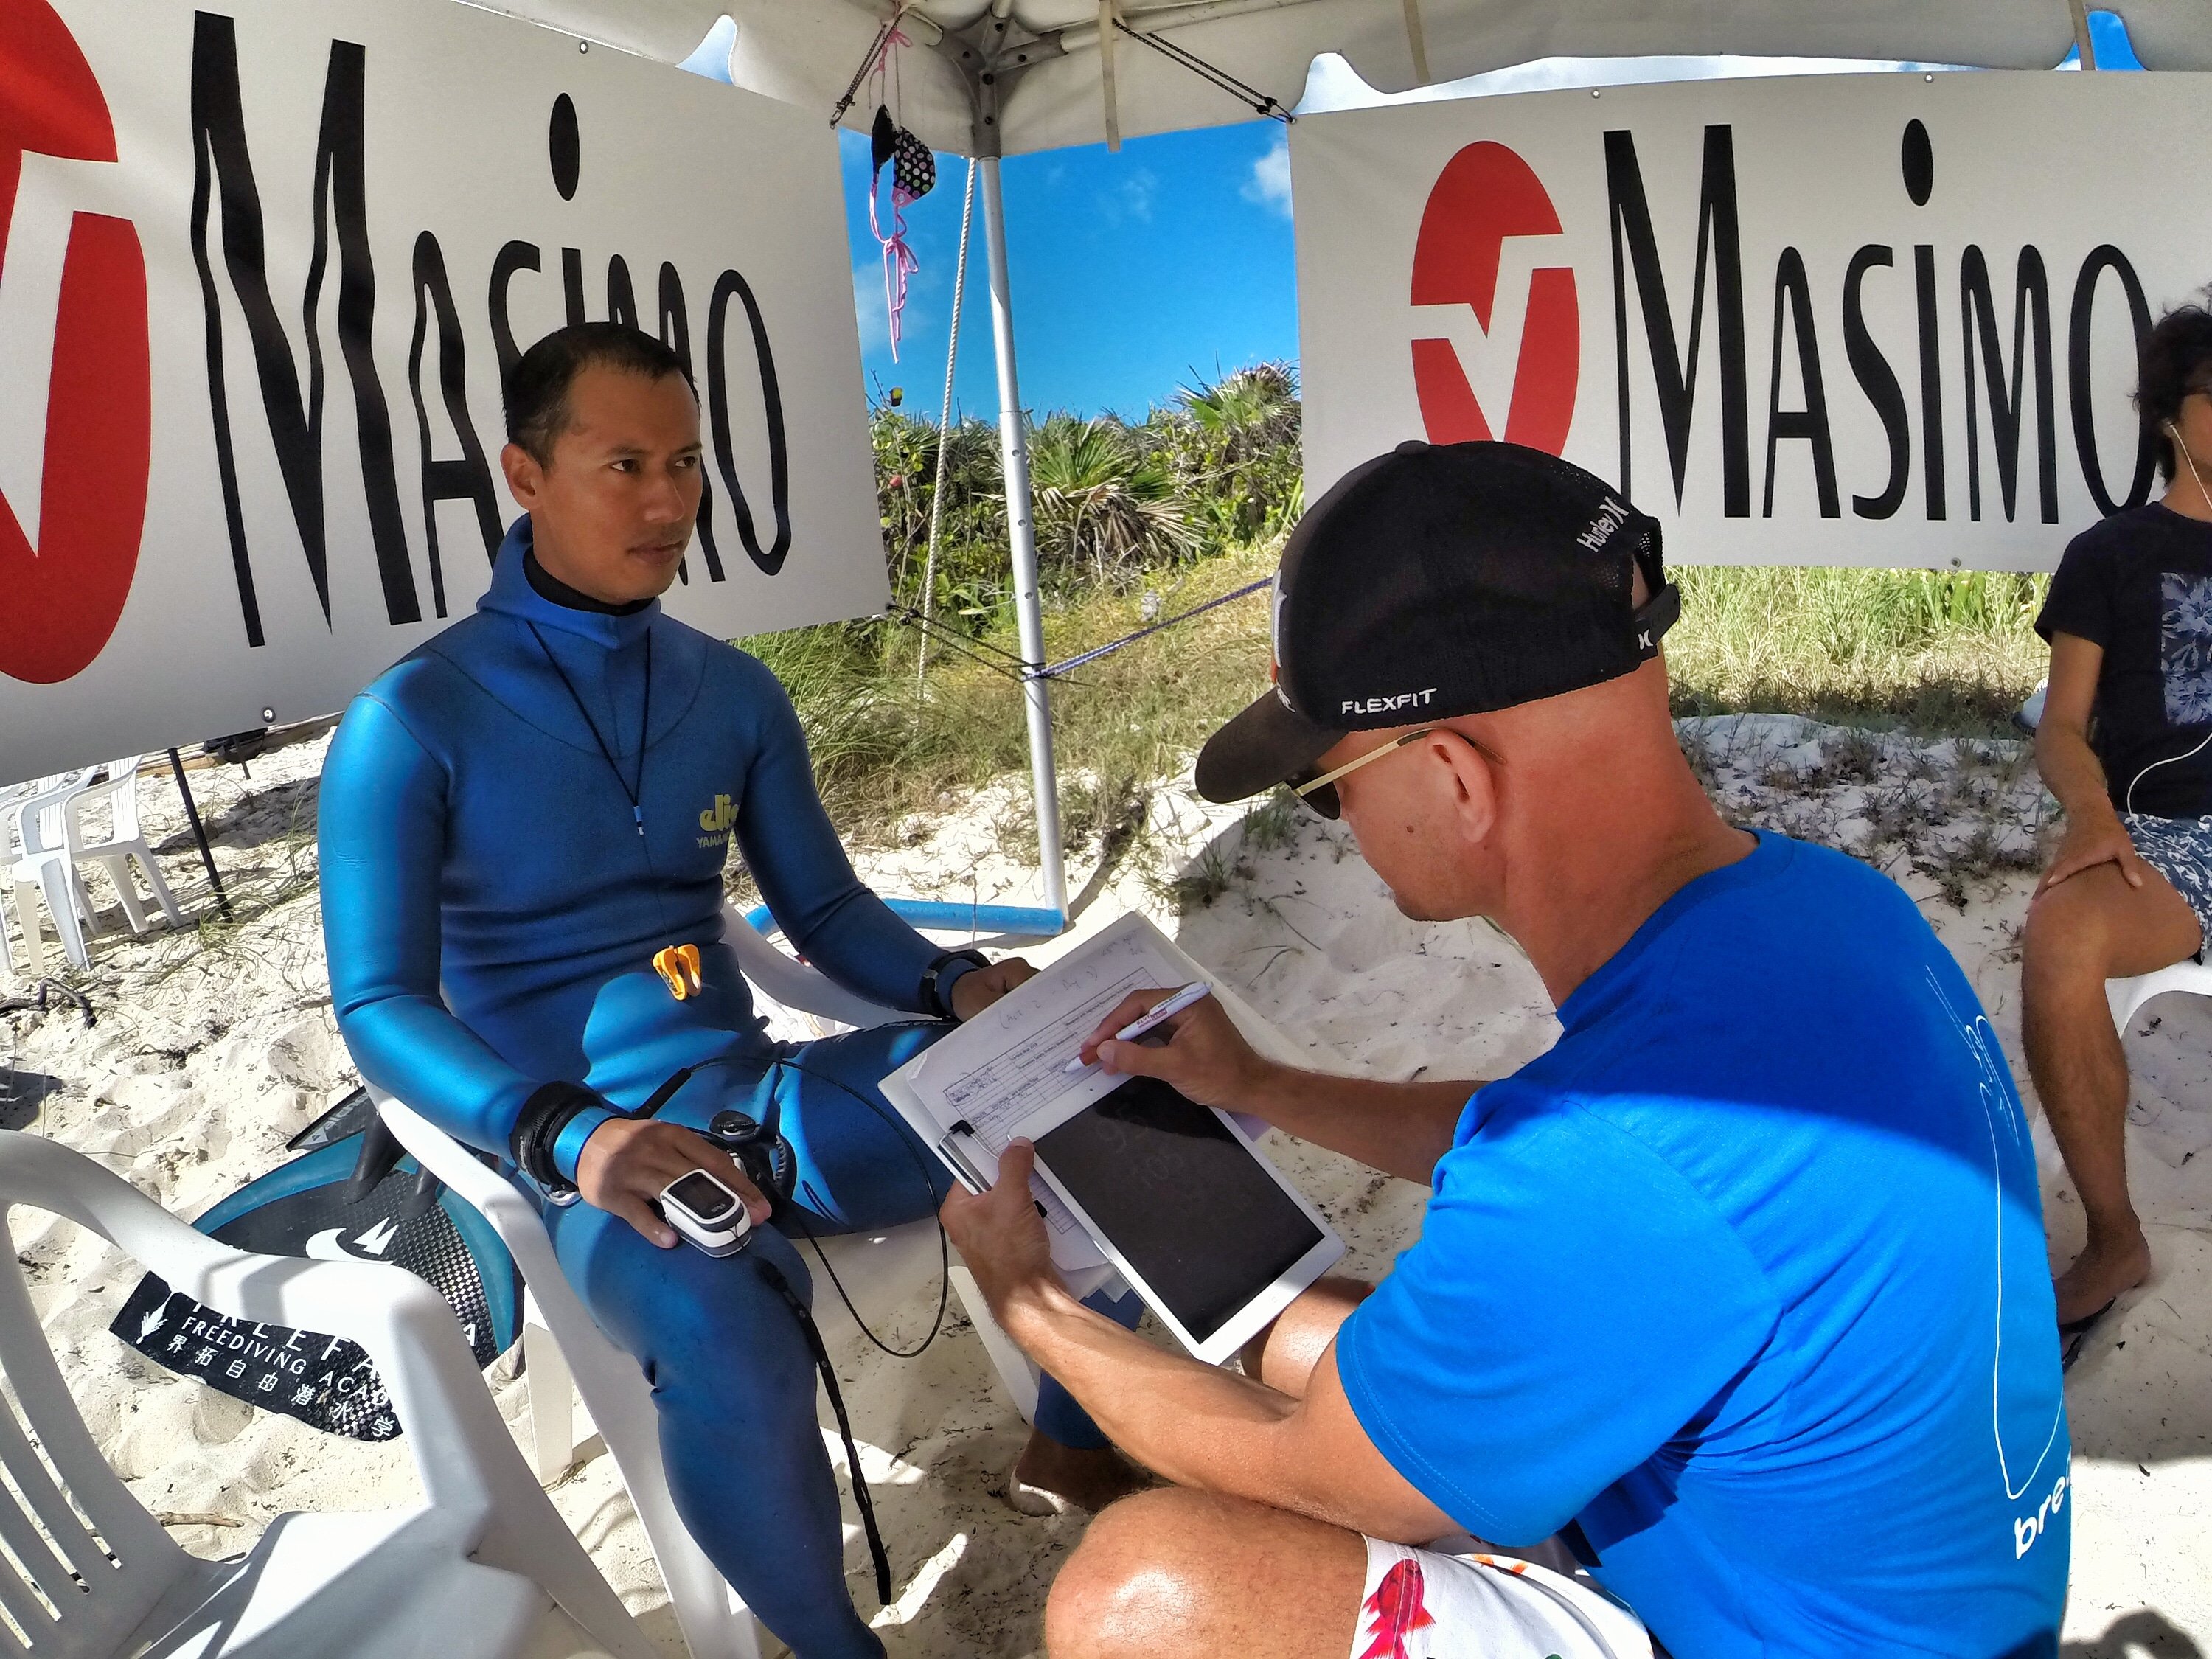 Aolin Wang of China checks in with Dr. Stig after a target depth performance to, have his oxygen levels assessed.